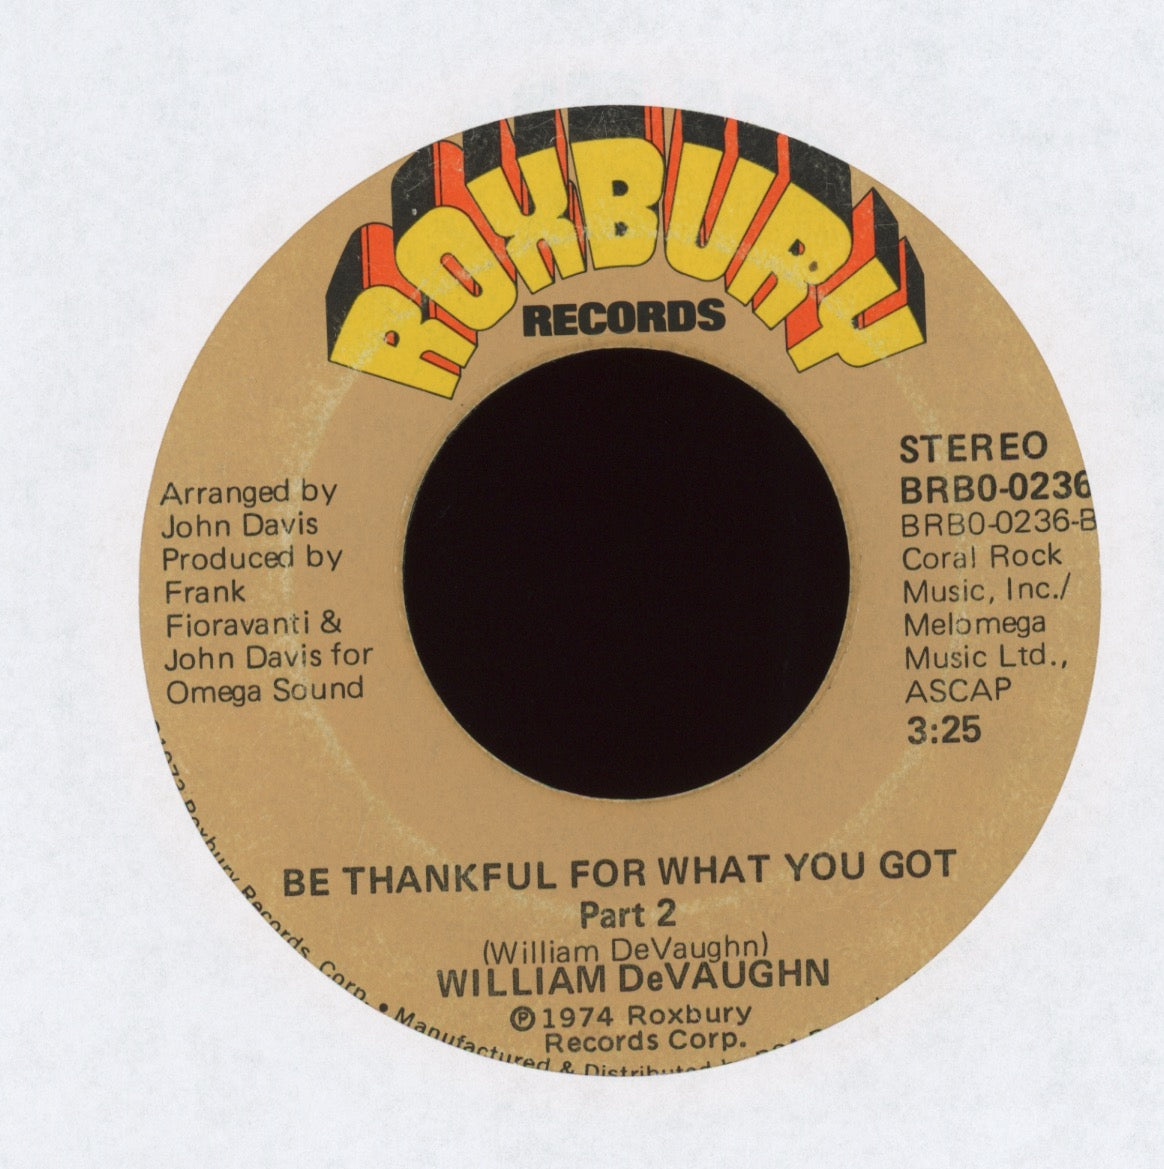 William DeVaughn - Be Thankful For What You Got on Roxbury